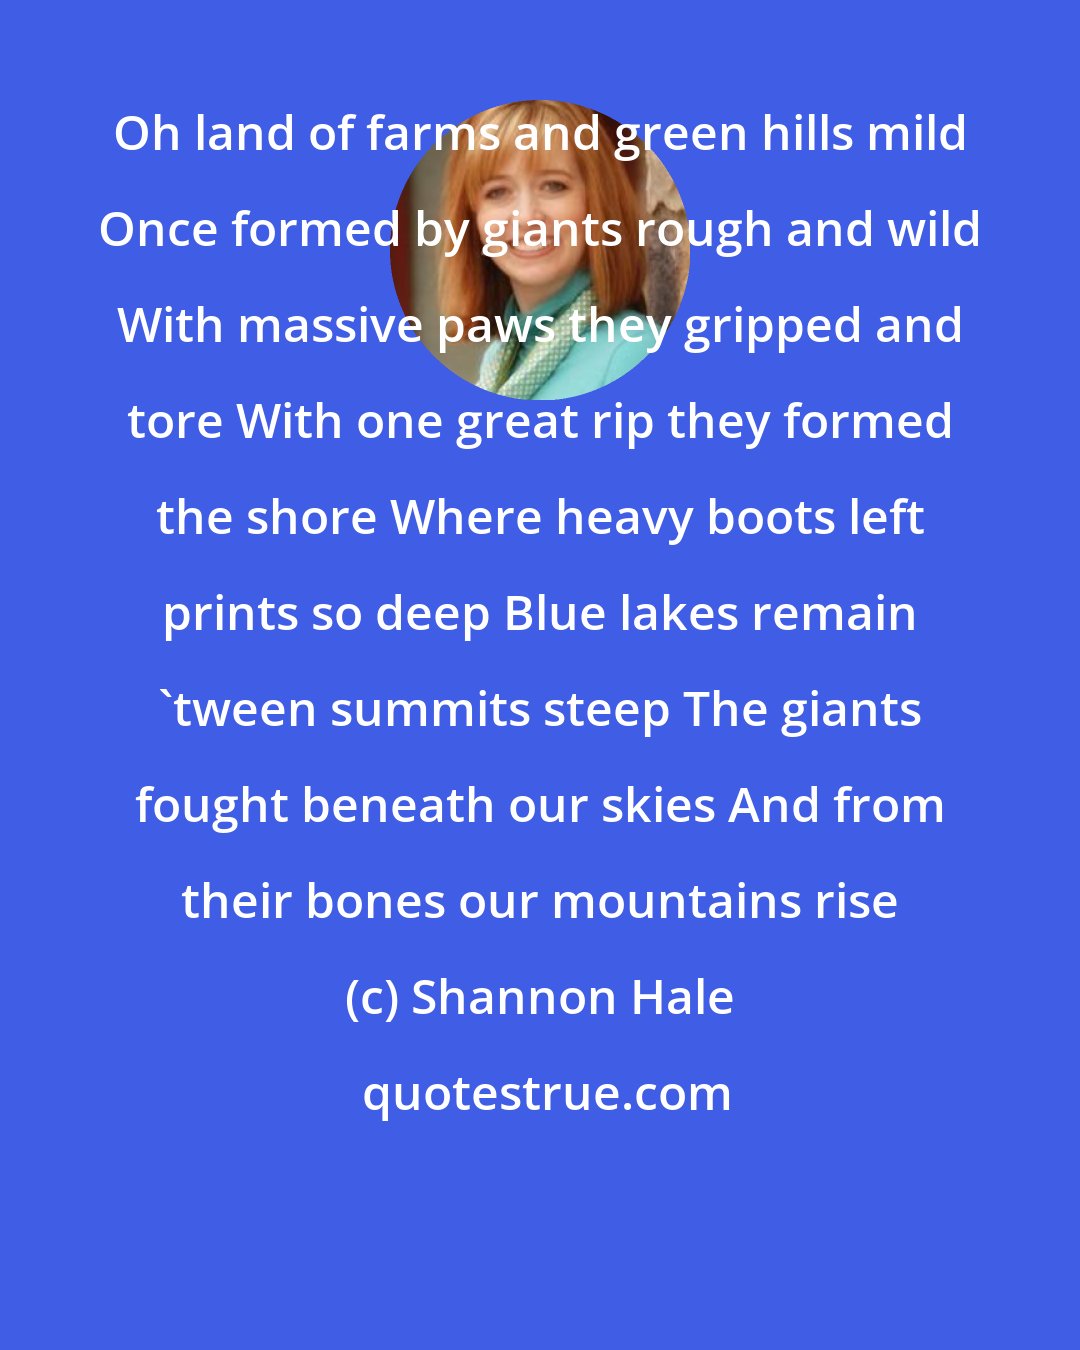 Shannon Hale: Oh land of farms and green hills mild Once formed by giants rough and wild With massive paws they gripped and tore With one great rip they formed the shore Where heavy boots left prints so deep Blue lakes remain 'tween summits steep The giants fought beneath our skies And from their bones our mountains rise